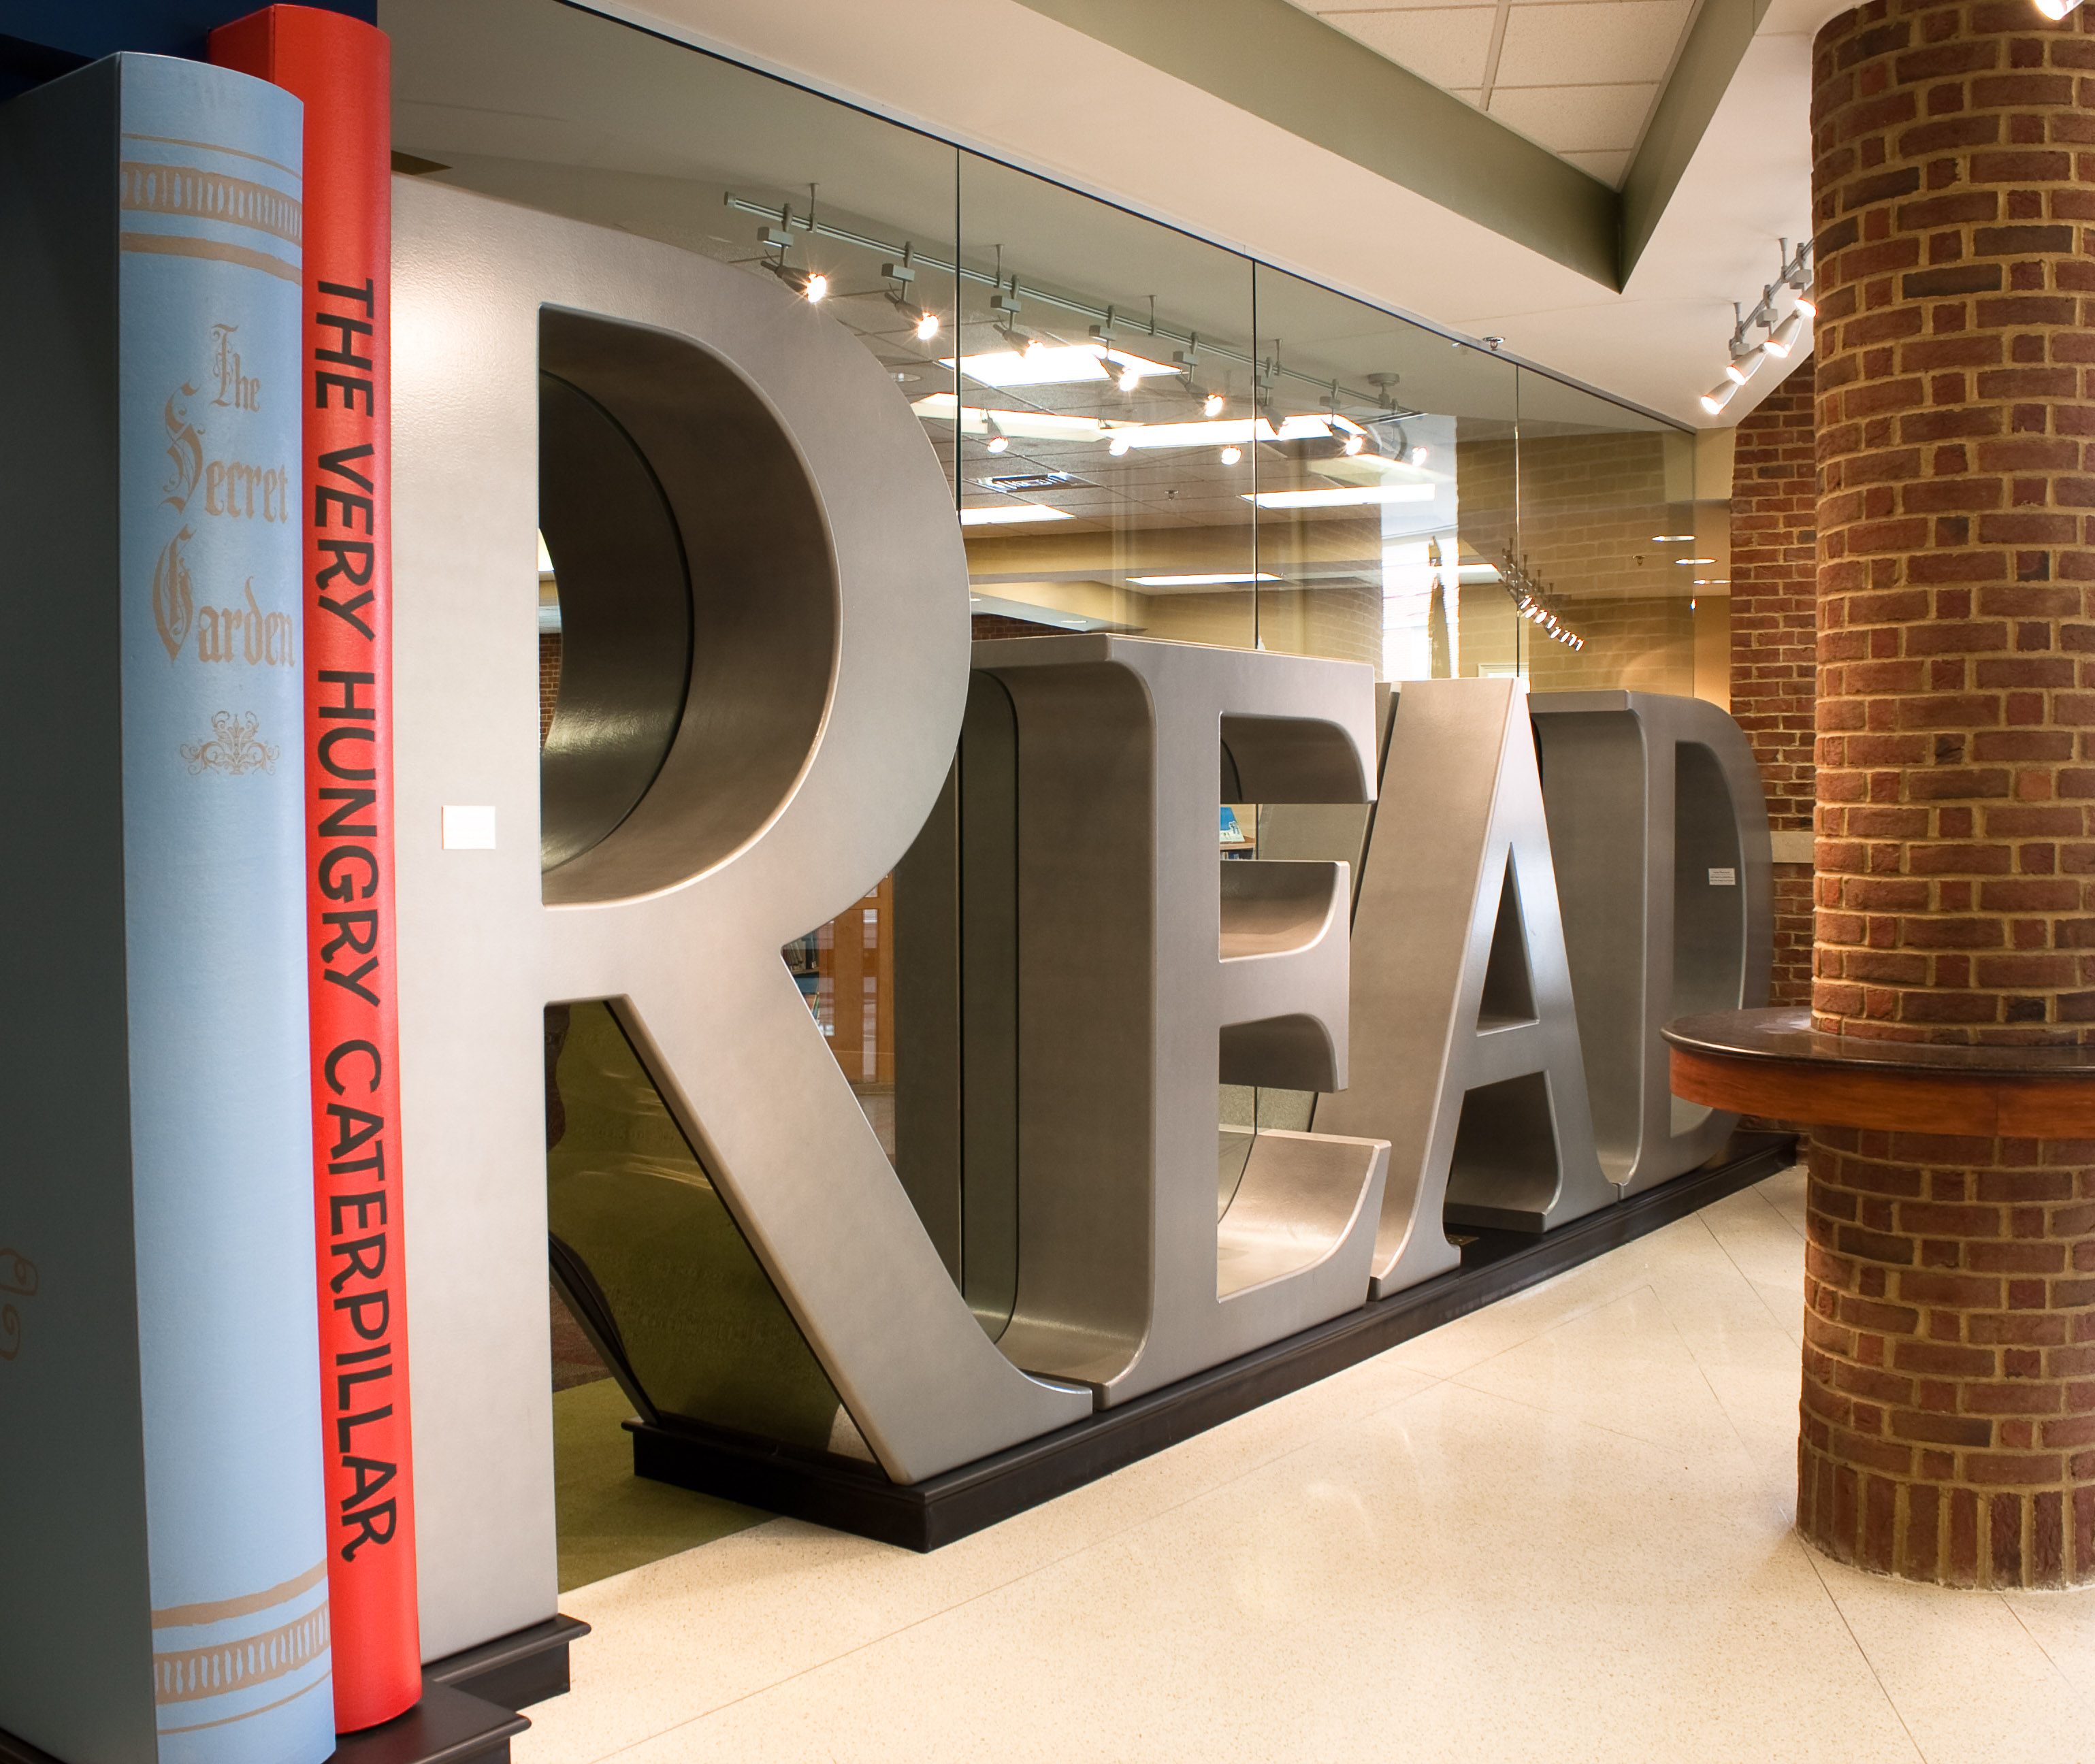 READ letters in library lobby